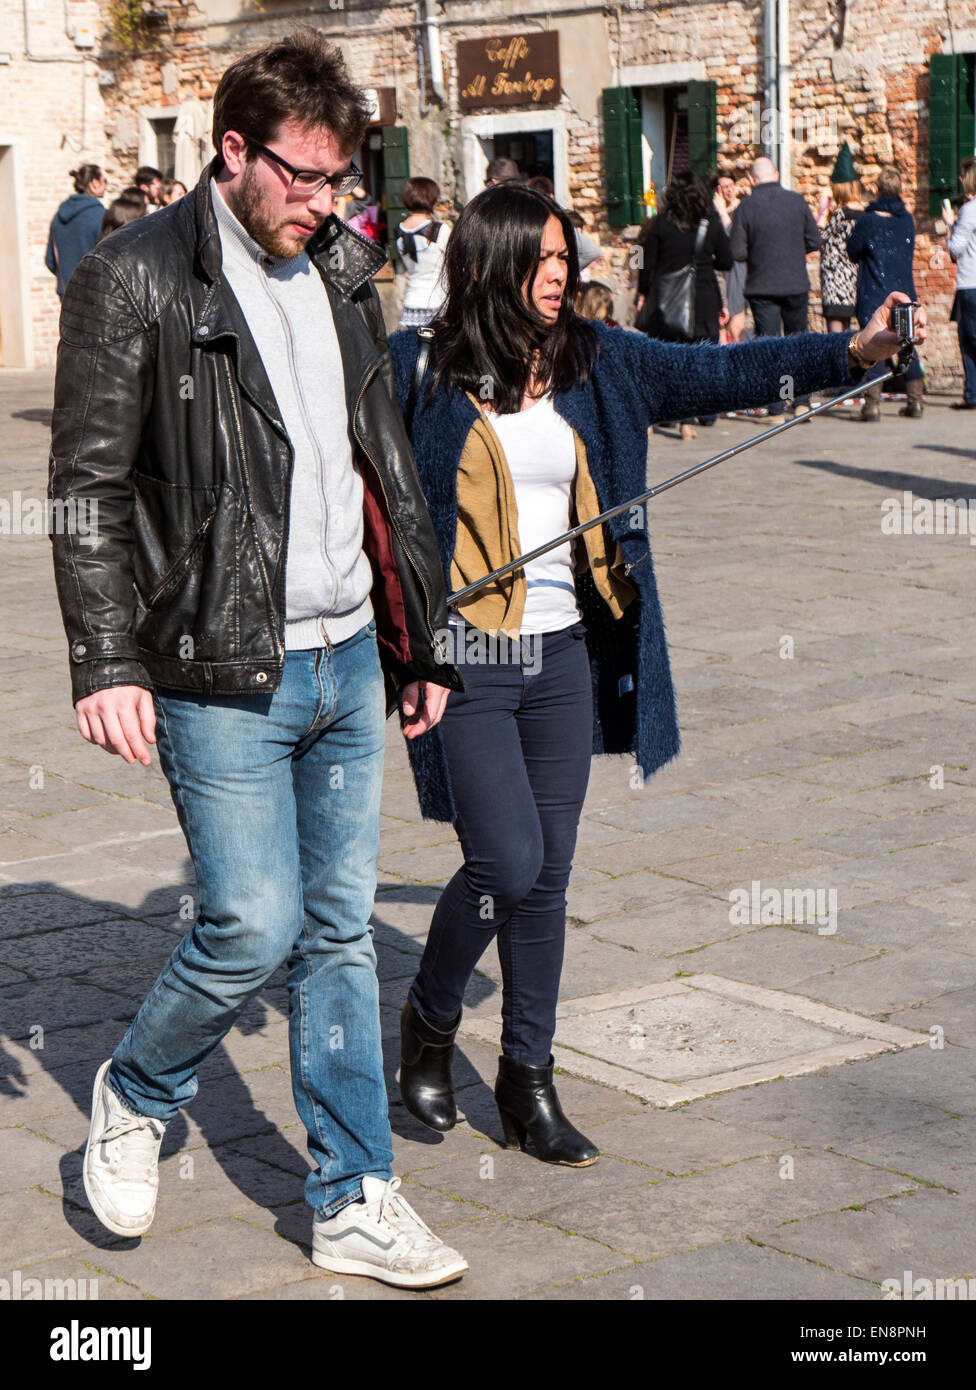 Tourists with GoPro camera on stick for Selfies, Venice, Italy, City of Canals Stock Photo